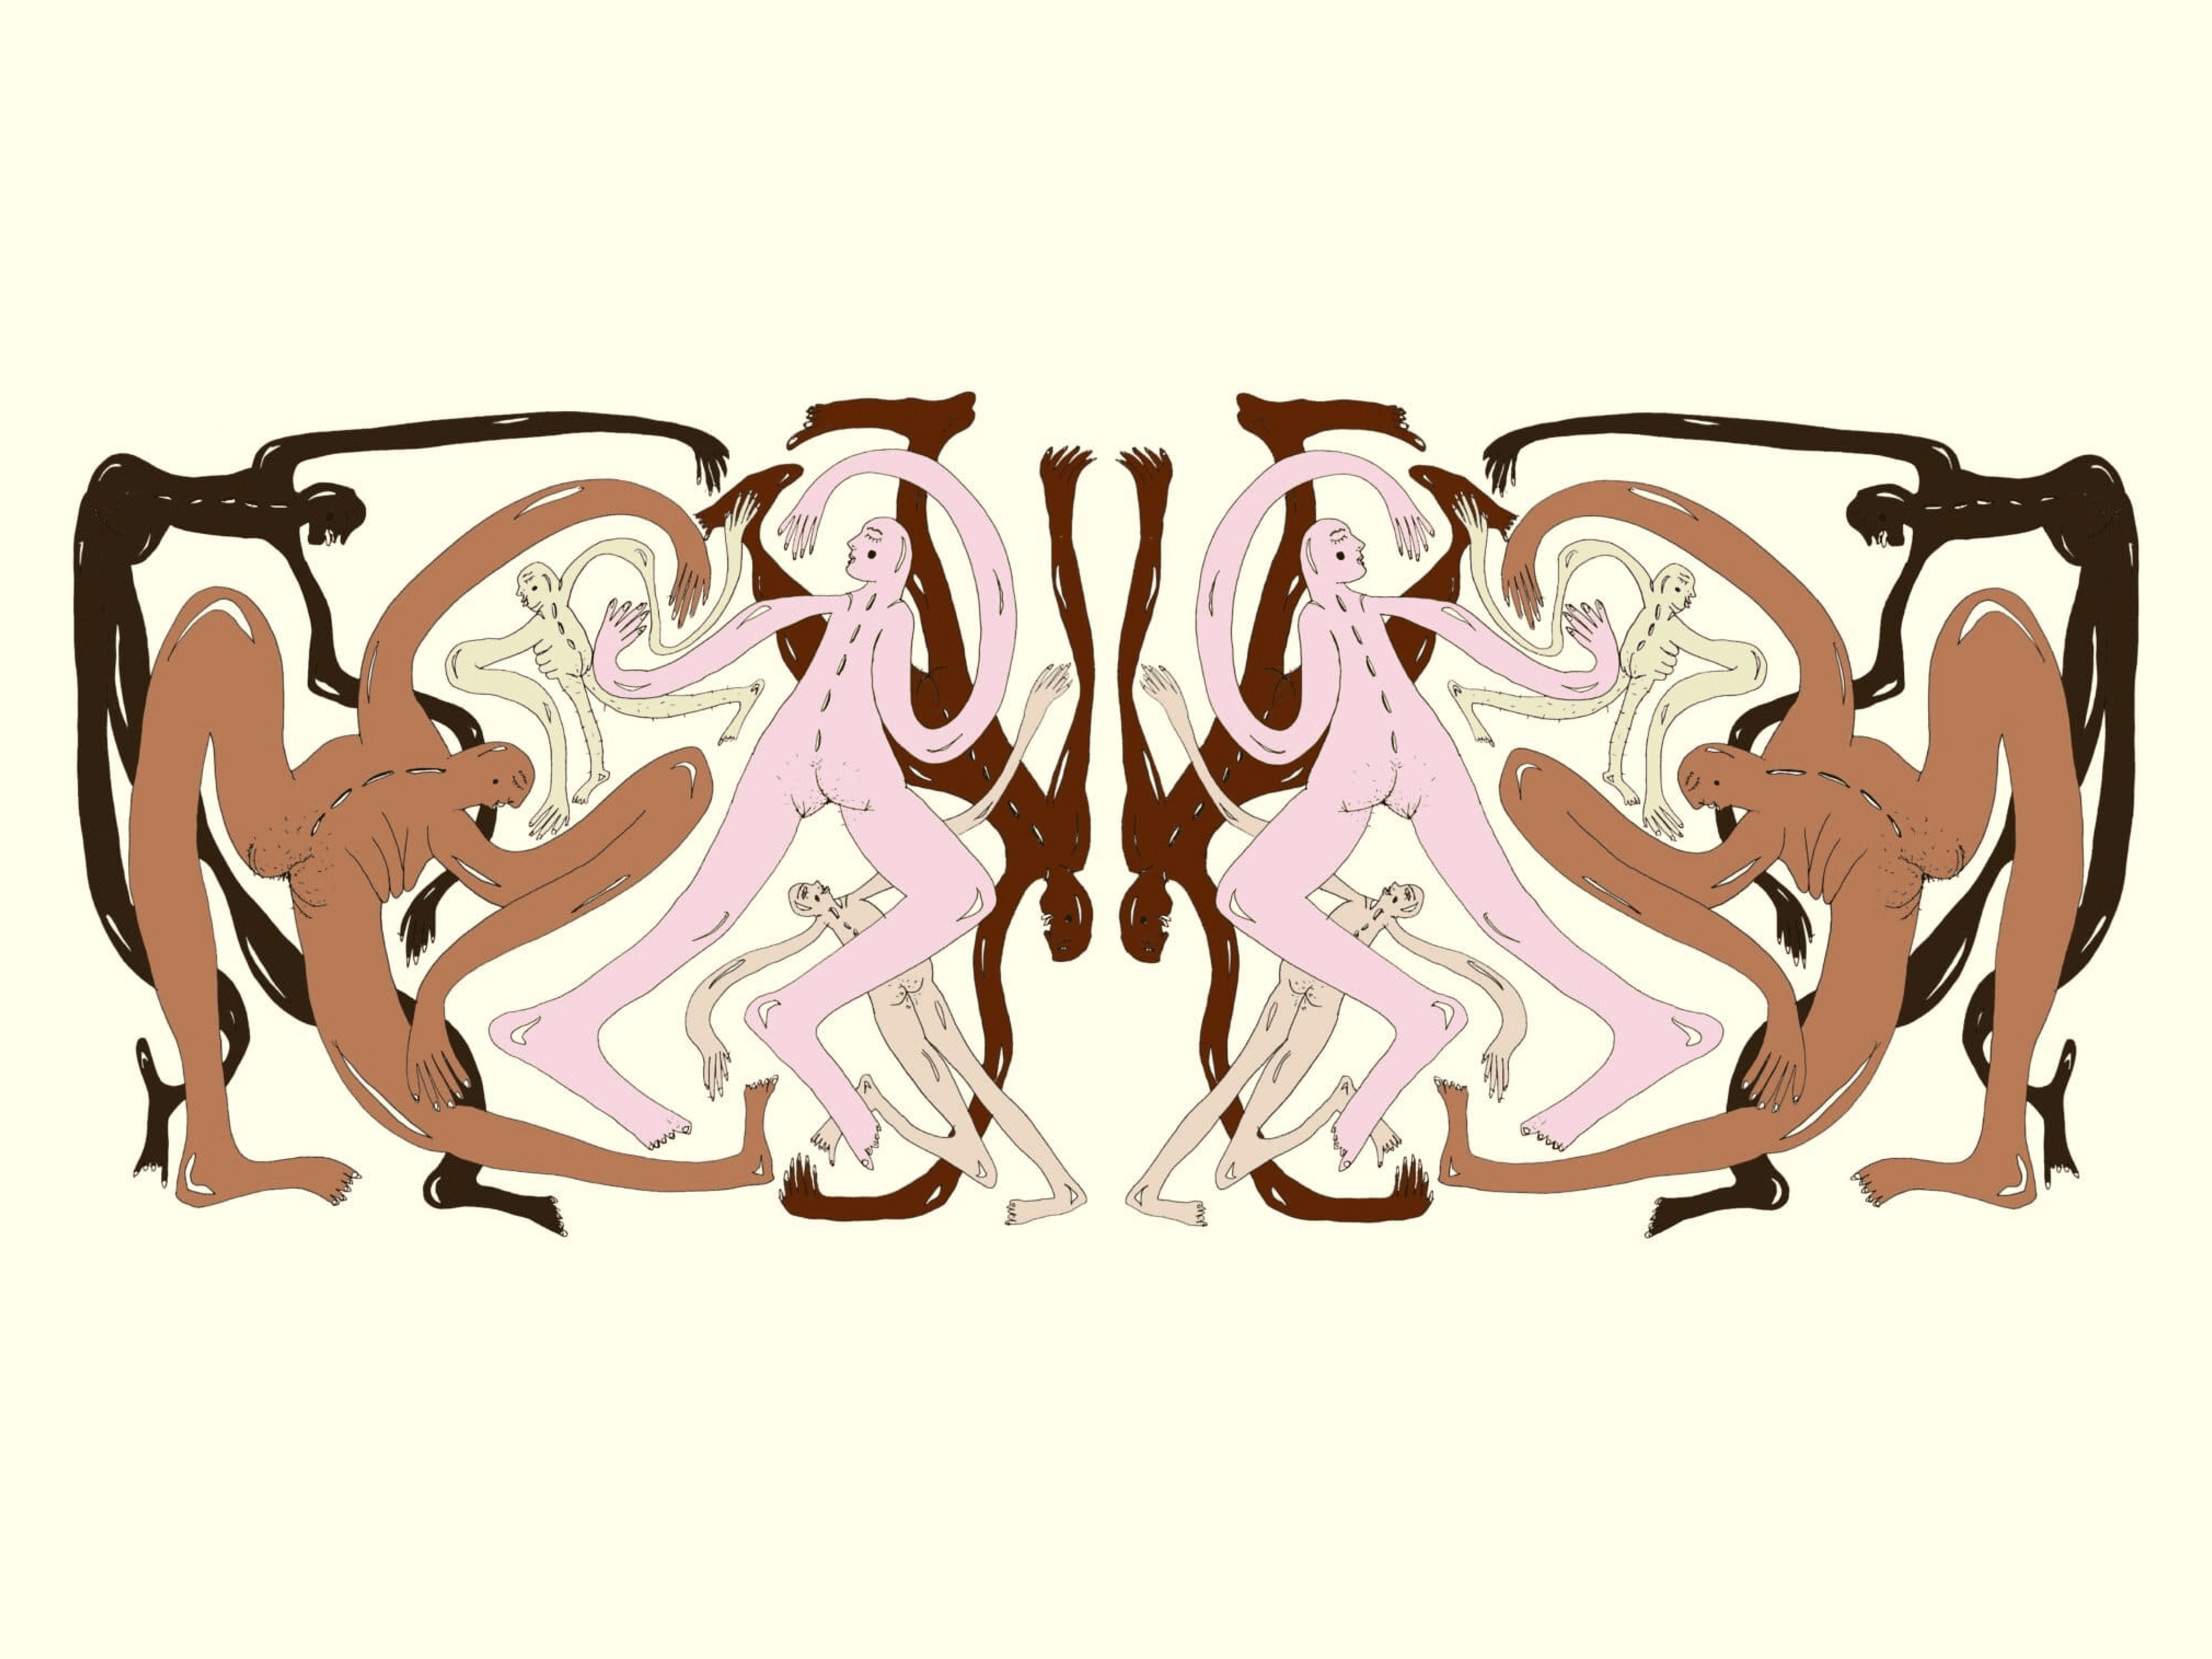 semi-abstract illustration of a series of nude people who aren't stereotypically male or female